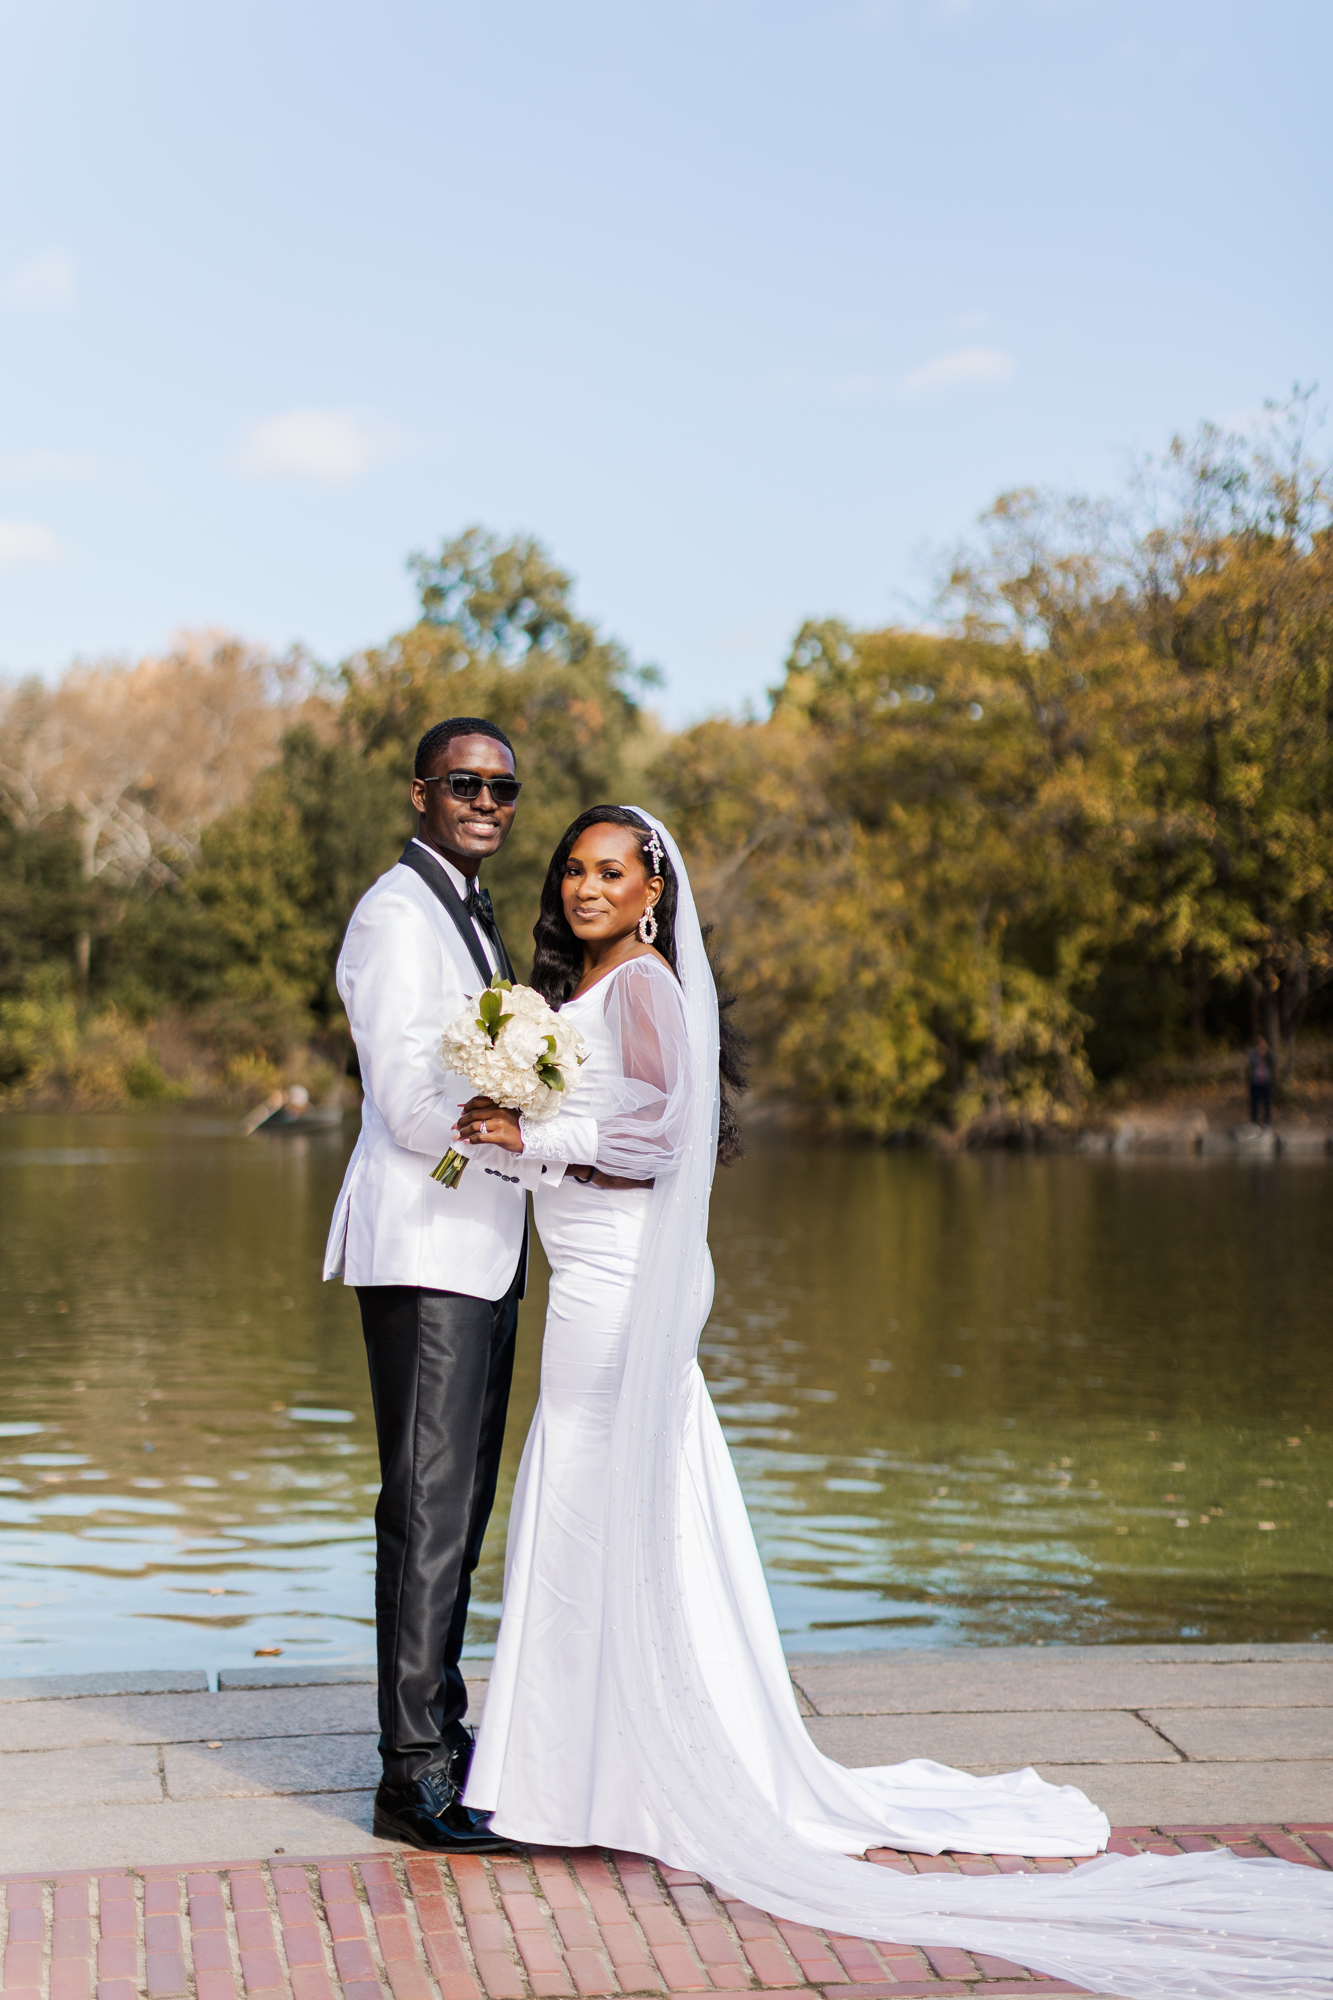 Original Central Park Wedding Photos on Cherry Hill in Fall